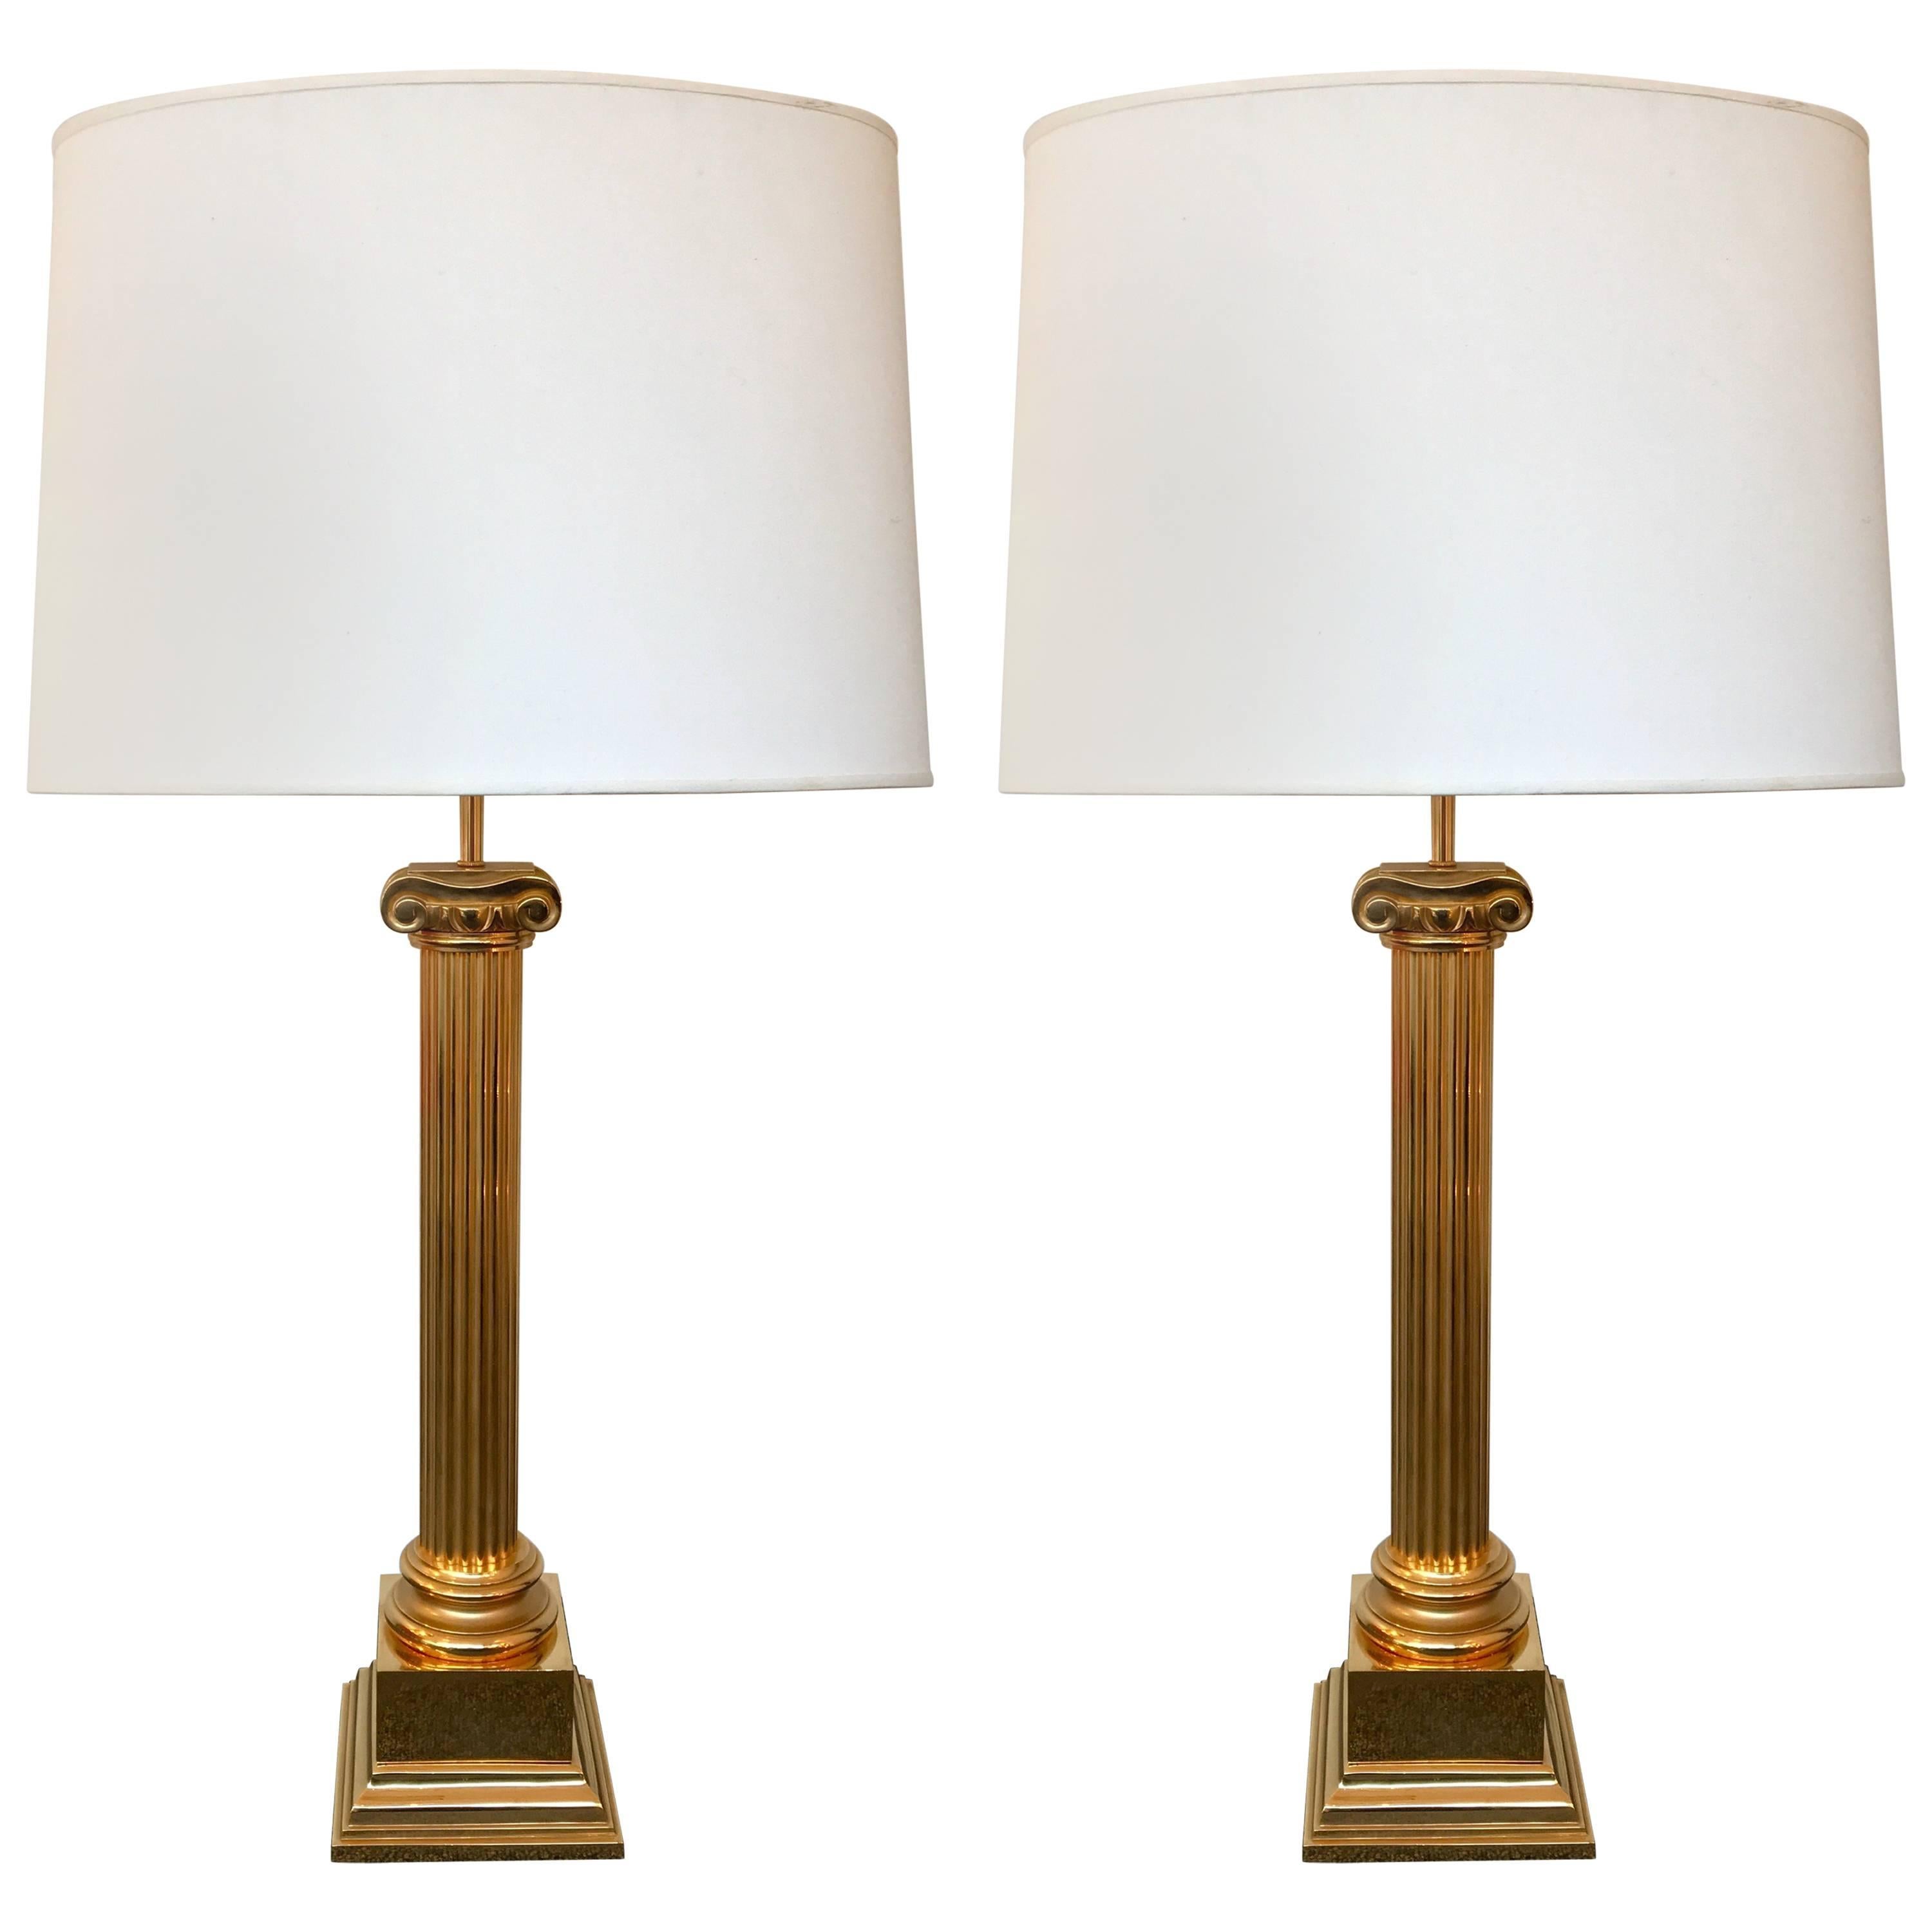 Pair of Lamps  Brass Neo Classical Column by Jordan. United Kingdom, 1980s